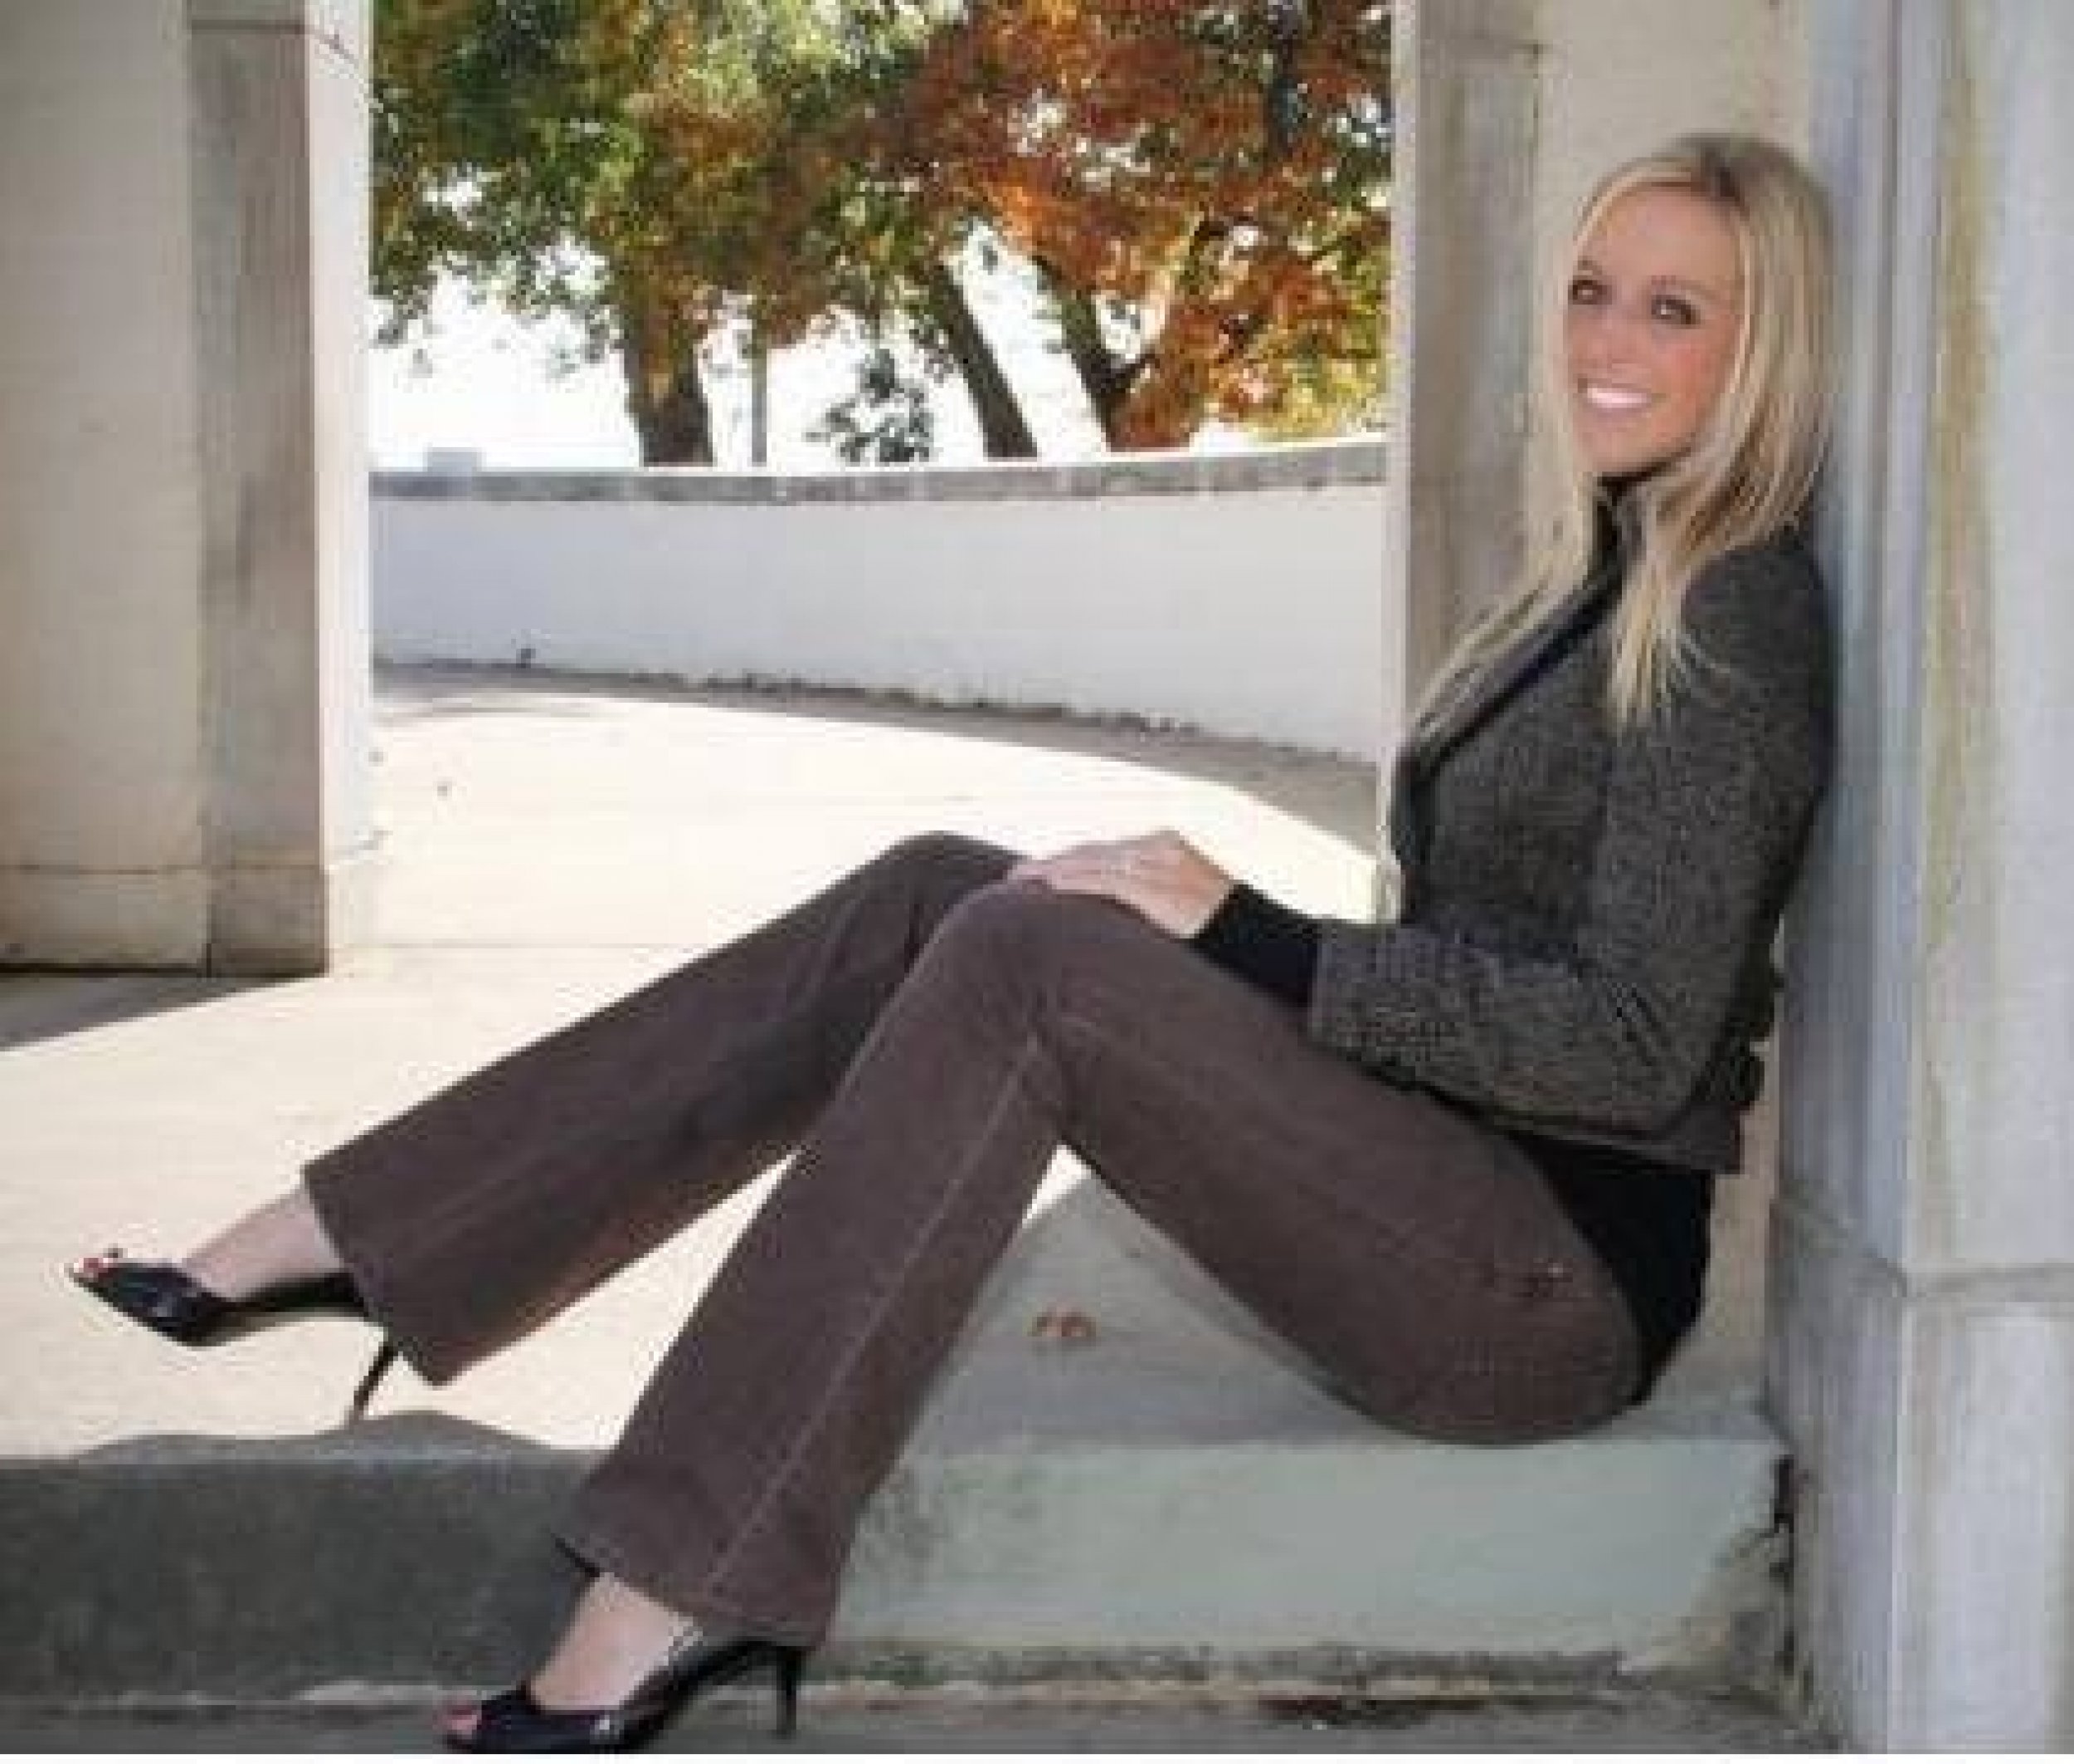 Jessica Dorrell, the 25-year-old woman who had an quotinappropriate relationshipquot with Bobby Petrino.